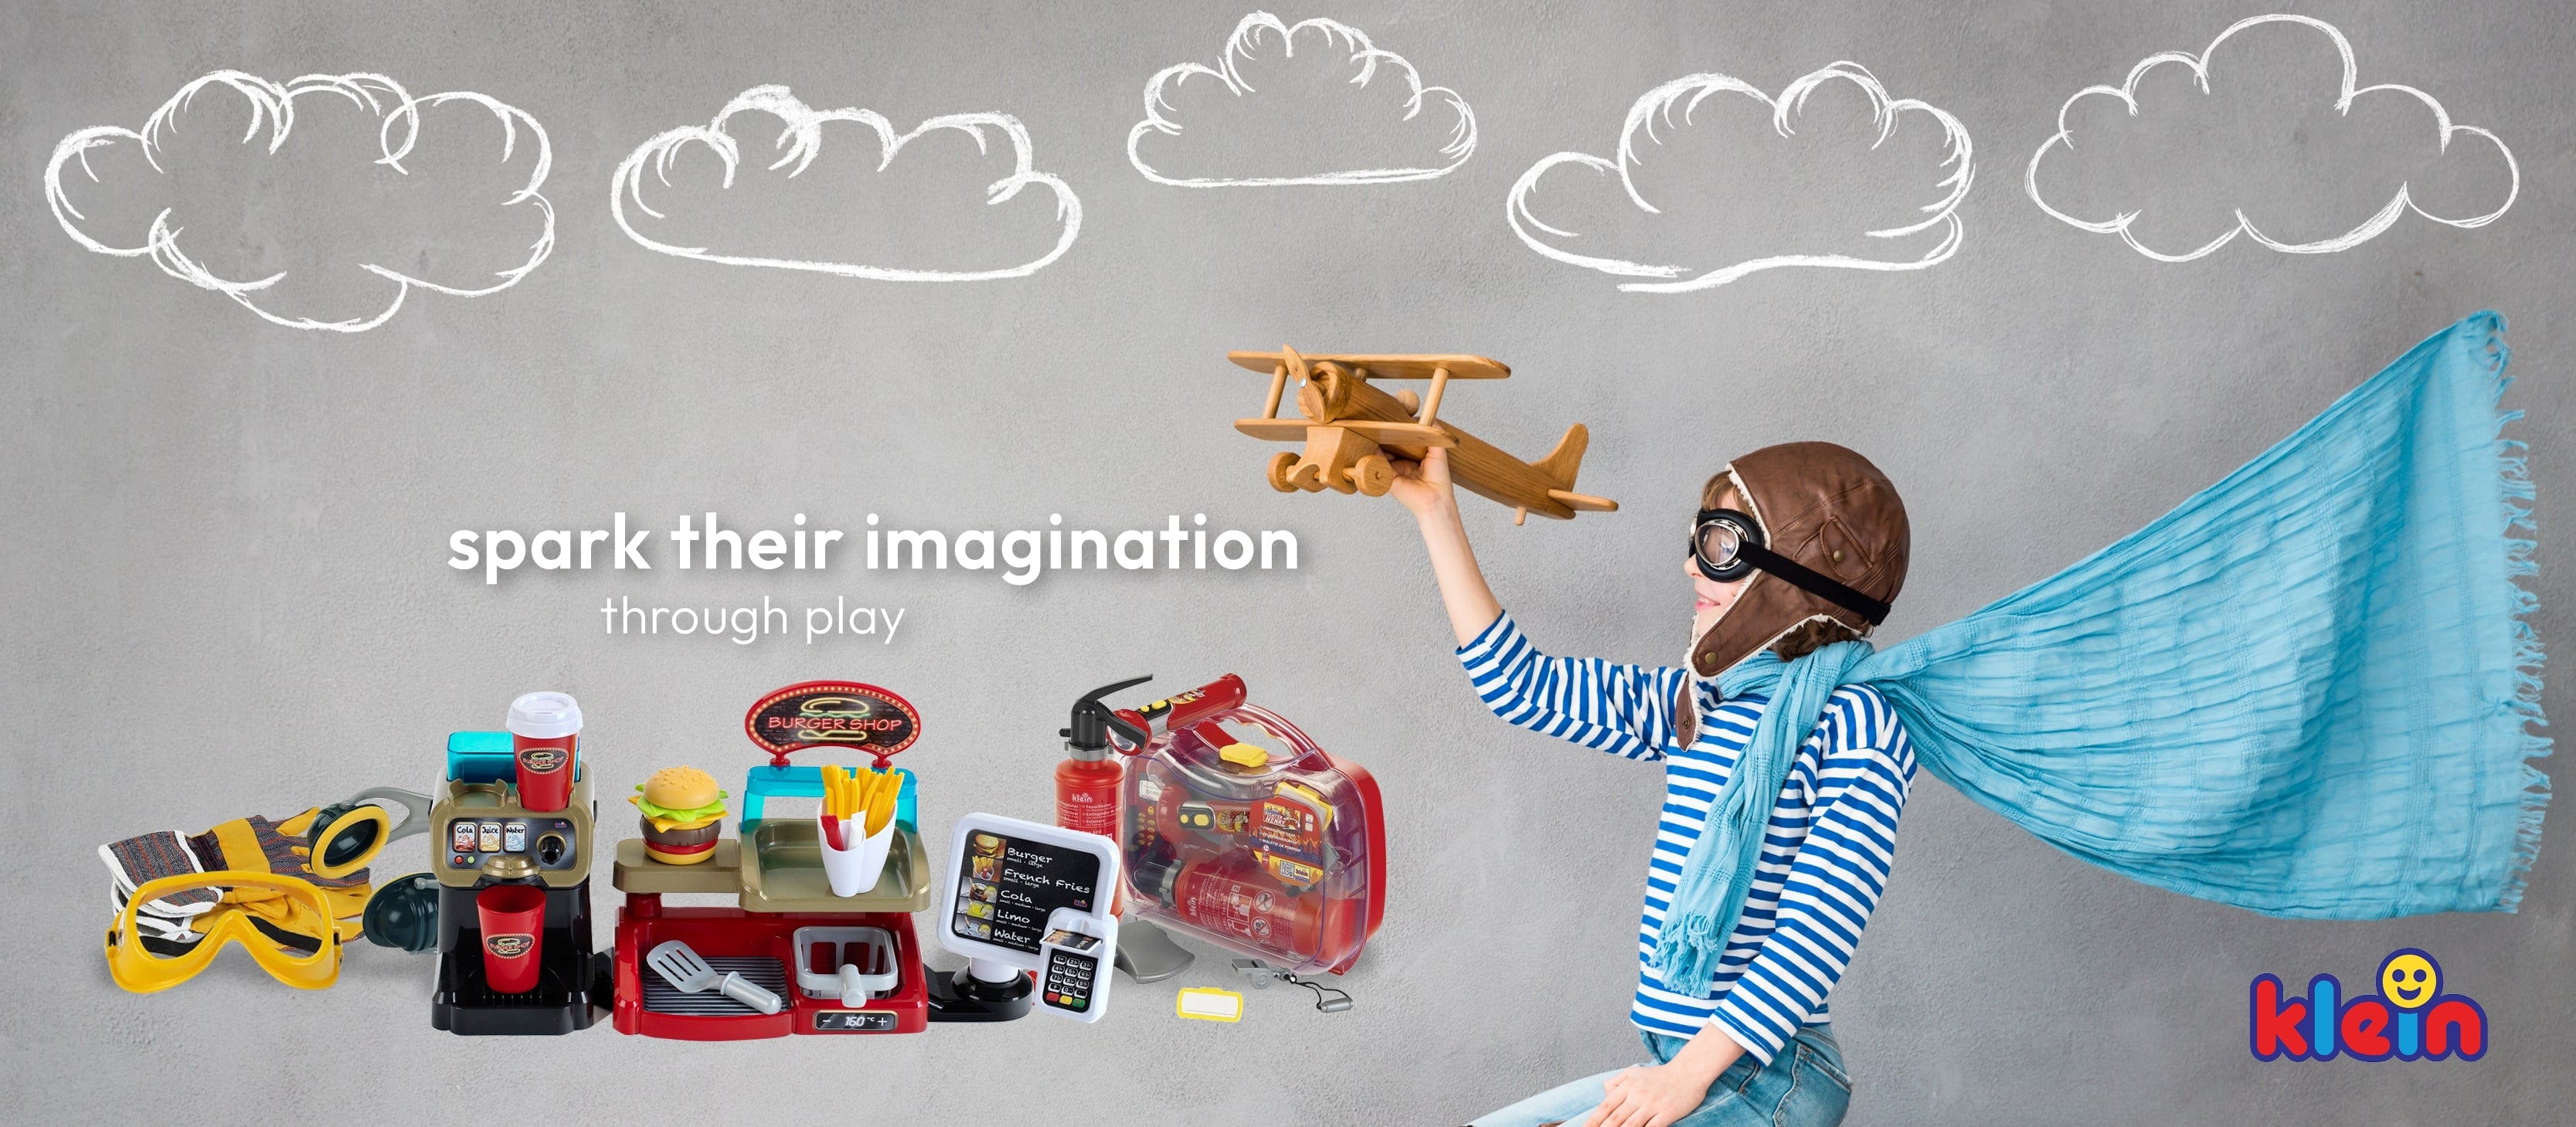 Spark imagination with Klein toys. Shop our toy selection for all your "play" needs